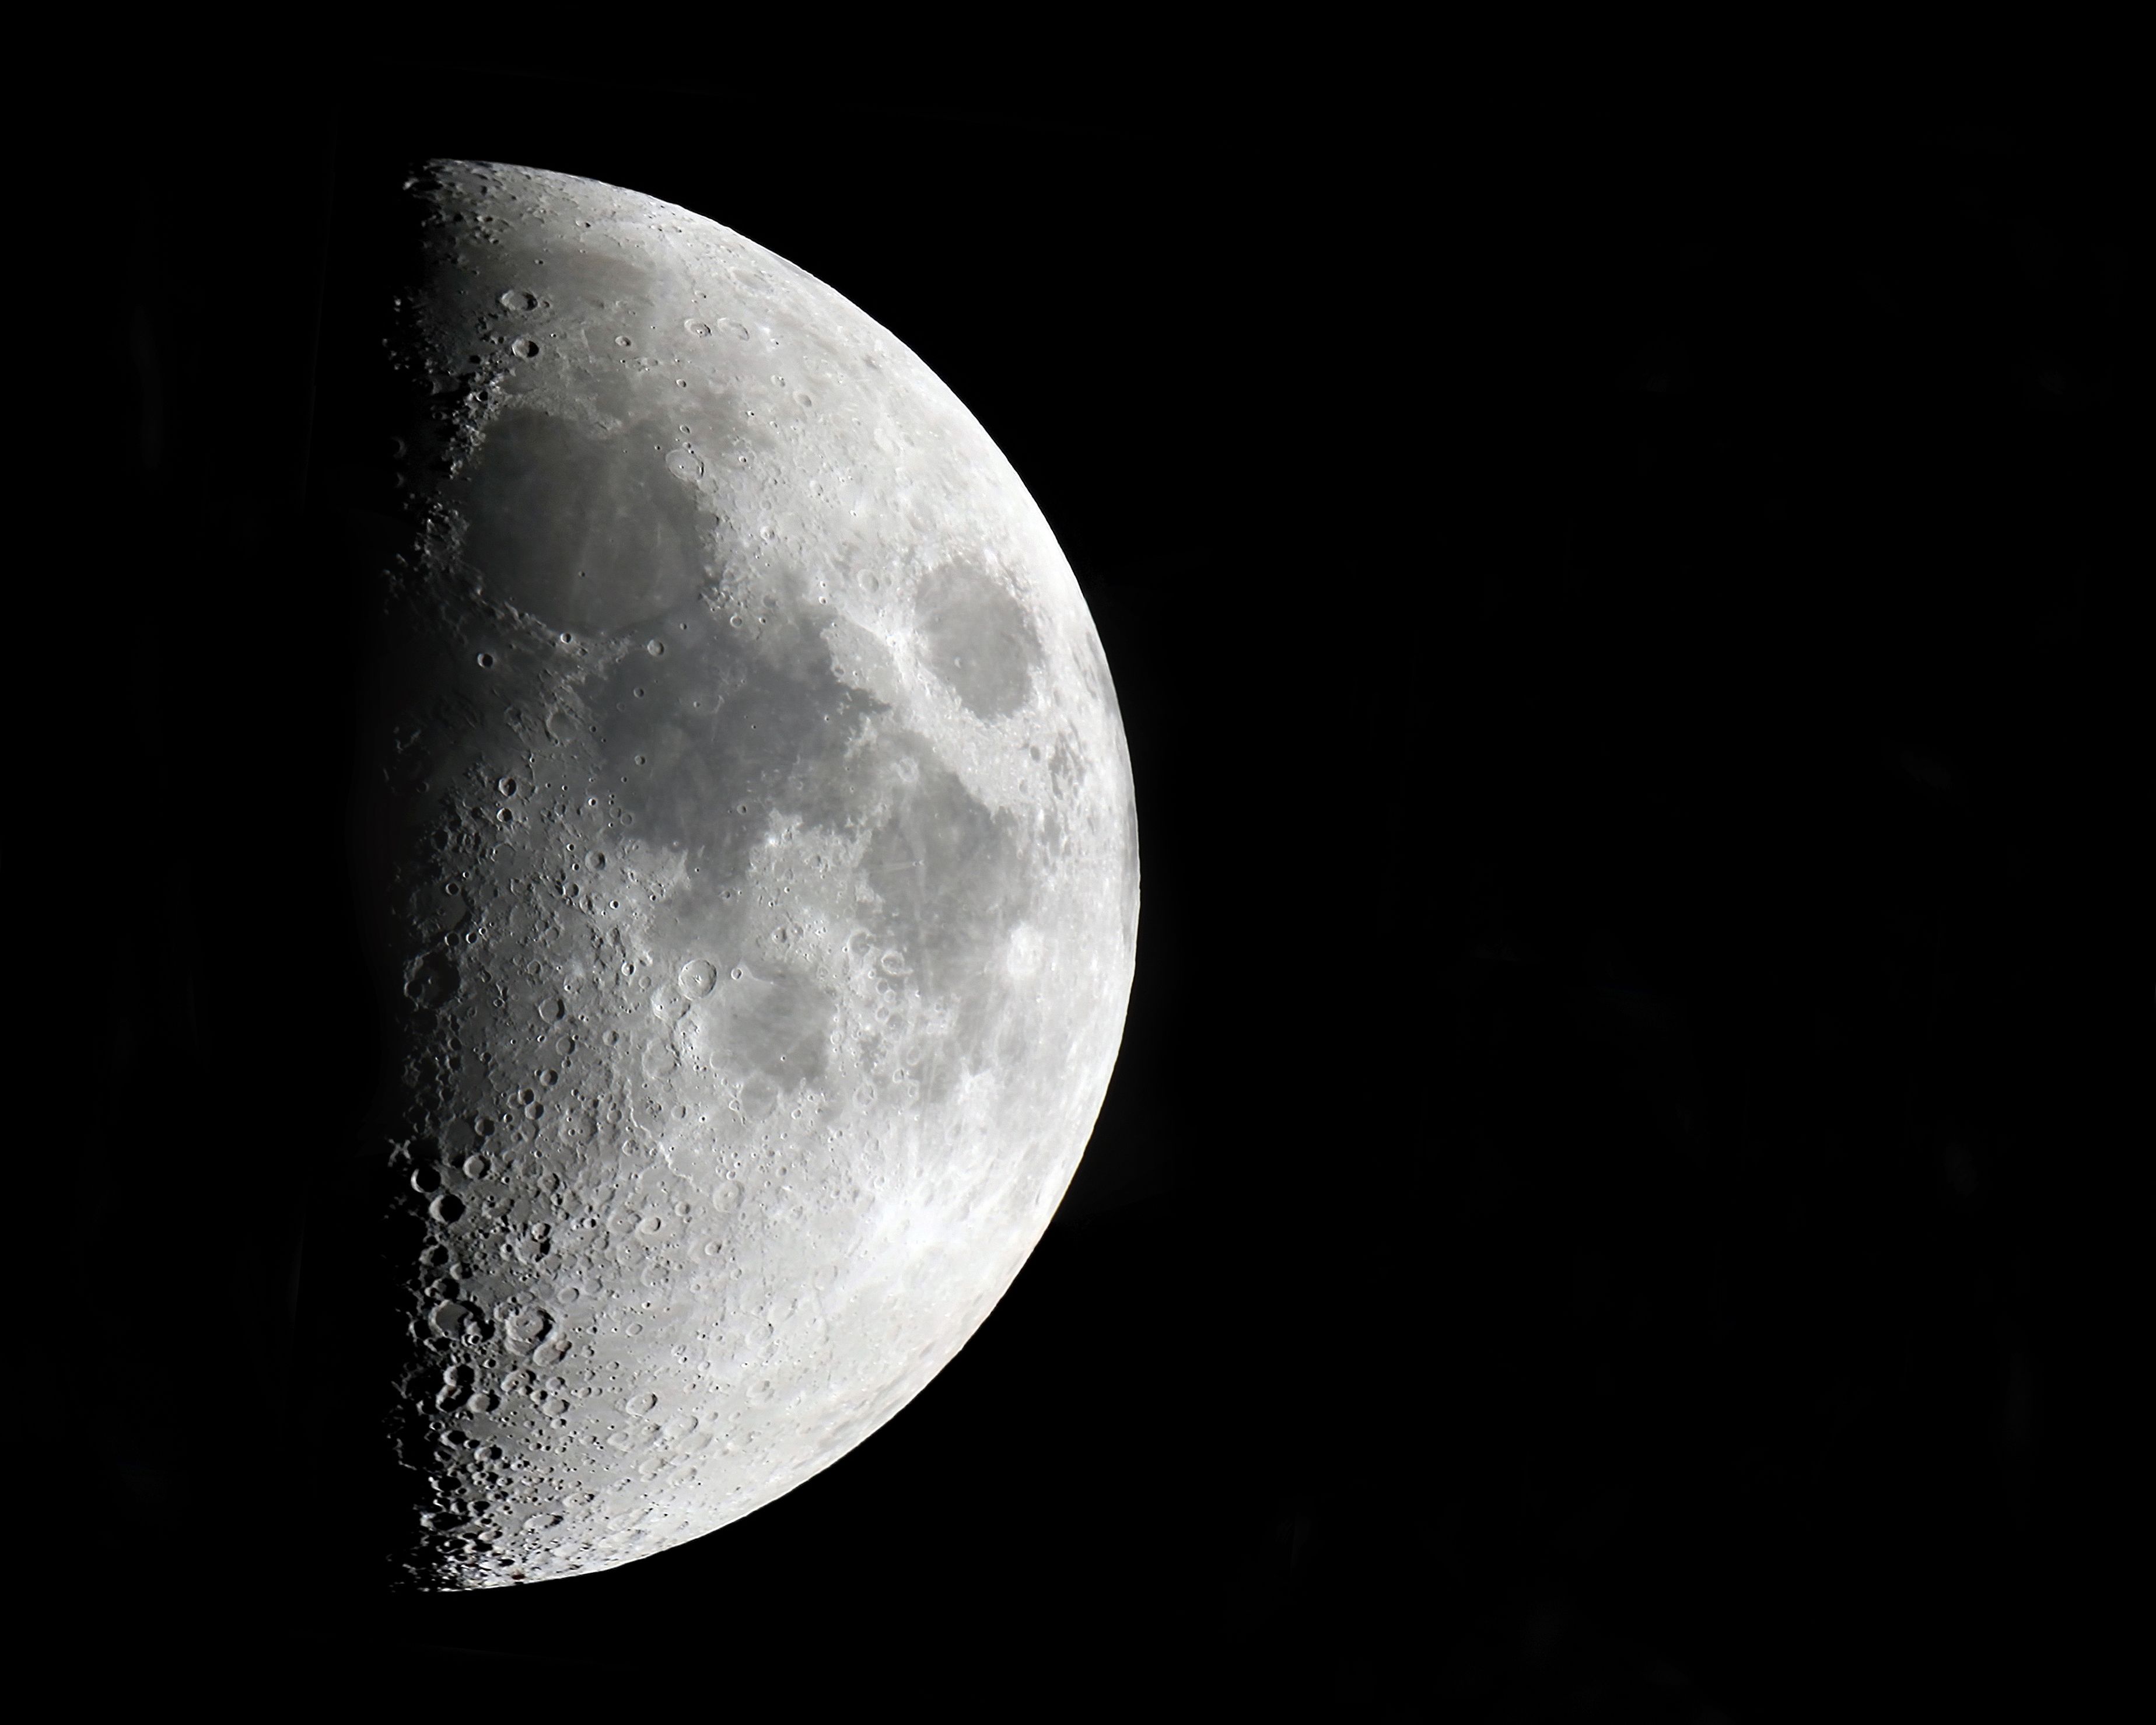 1st Quarter Moon with the "Lunar X" Astronomy Images at Orion Telescopes